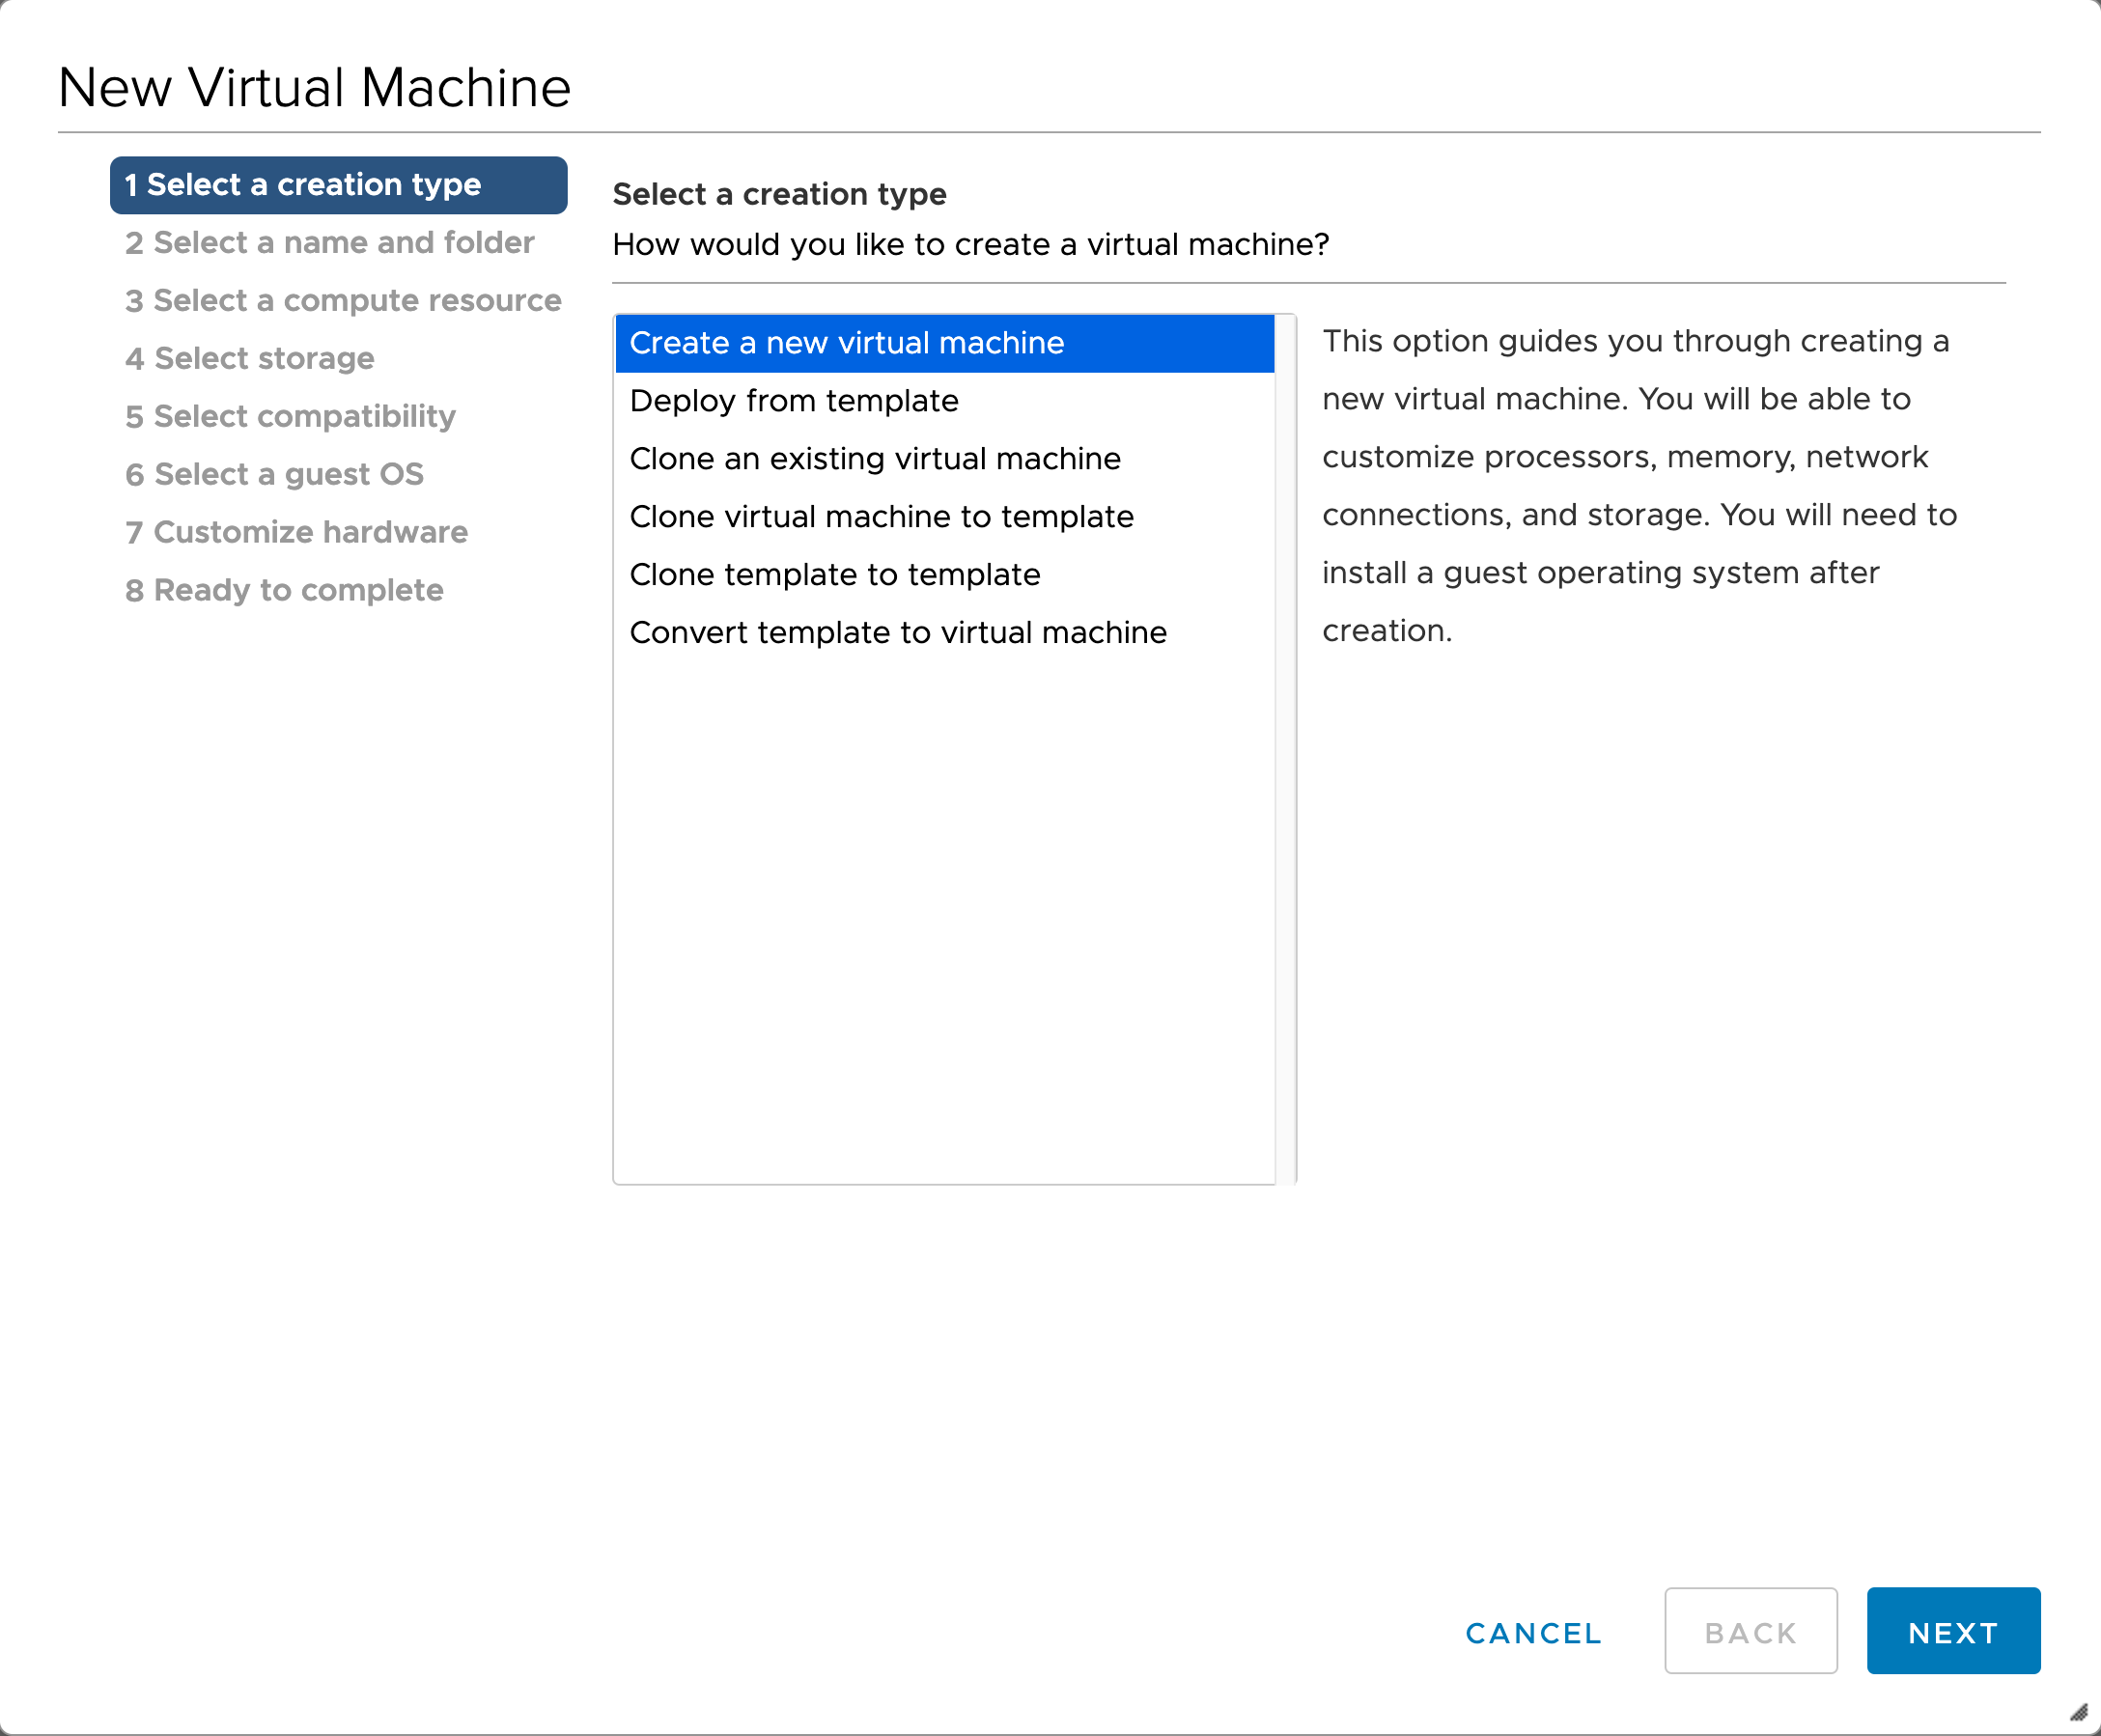 Screenshot of the "Select a creation type" section of the New Virtual Machine creation pane.